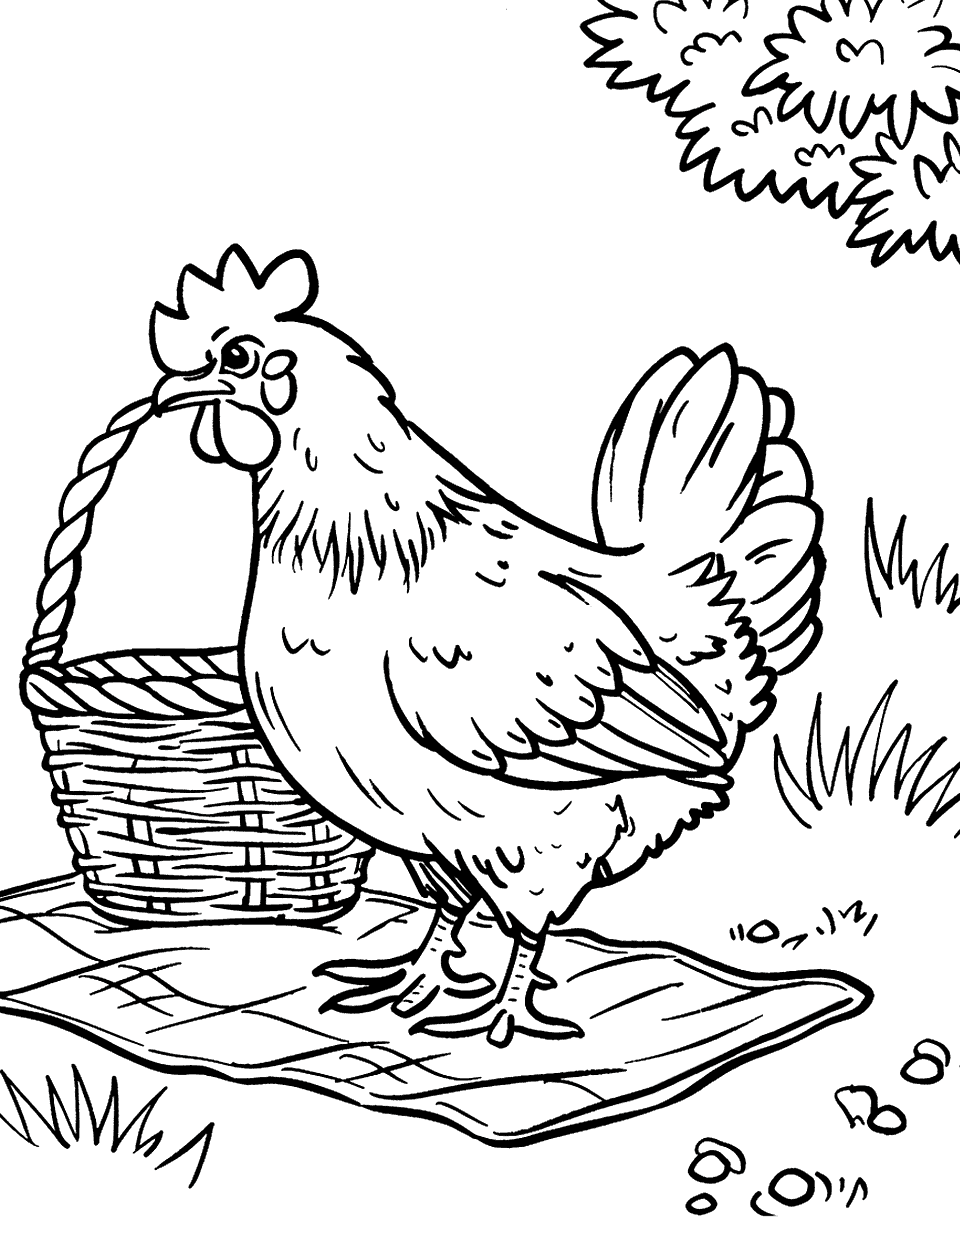 Chicken Picnic on the Farm Coloring Page - A chicken standing on a picnic blanket, with a picnic basket beside it.